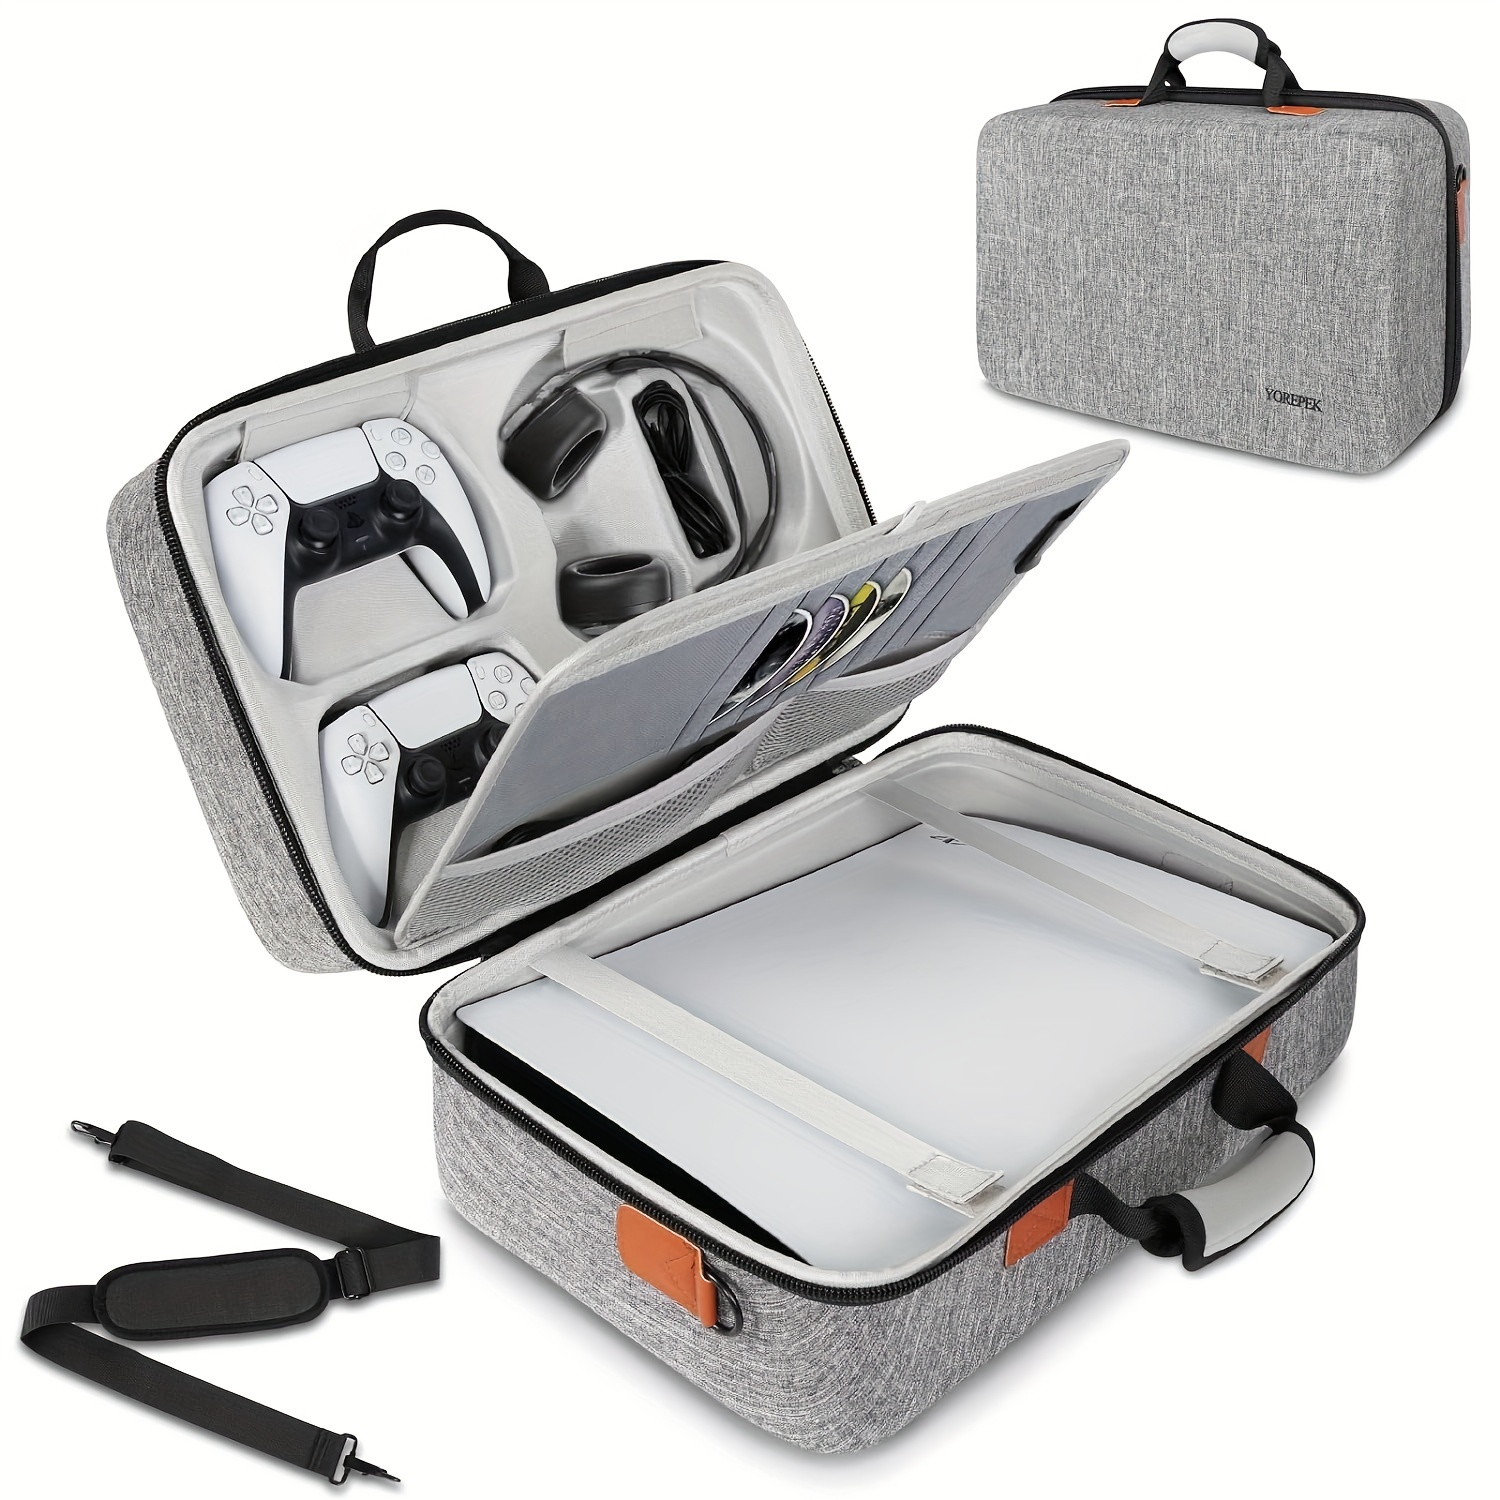 Portable Carrying Bag Shockproof Protective Travel Case Storage